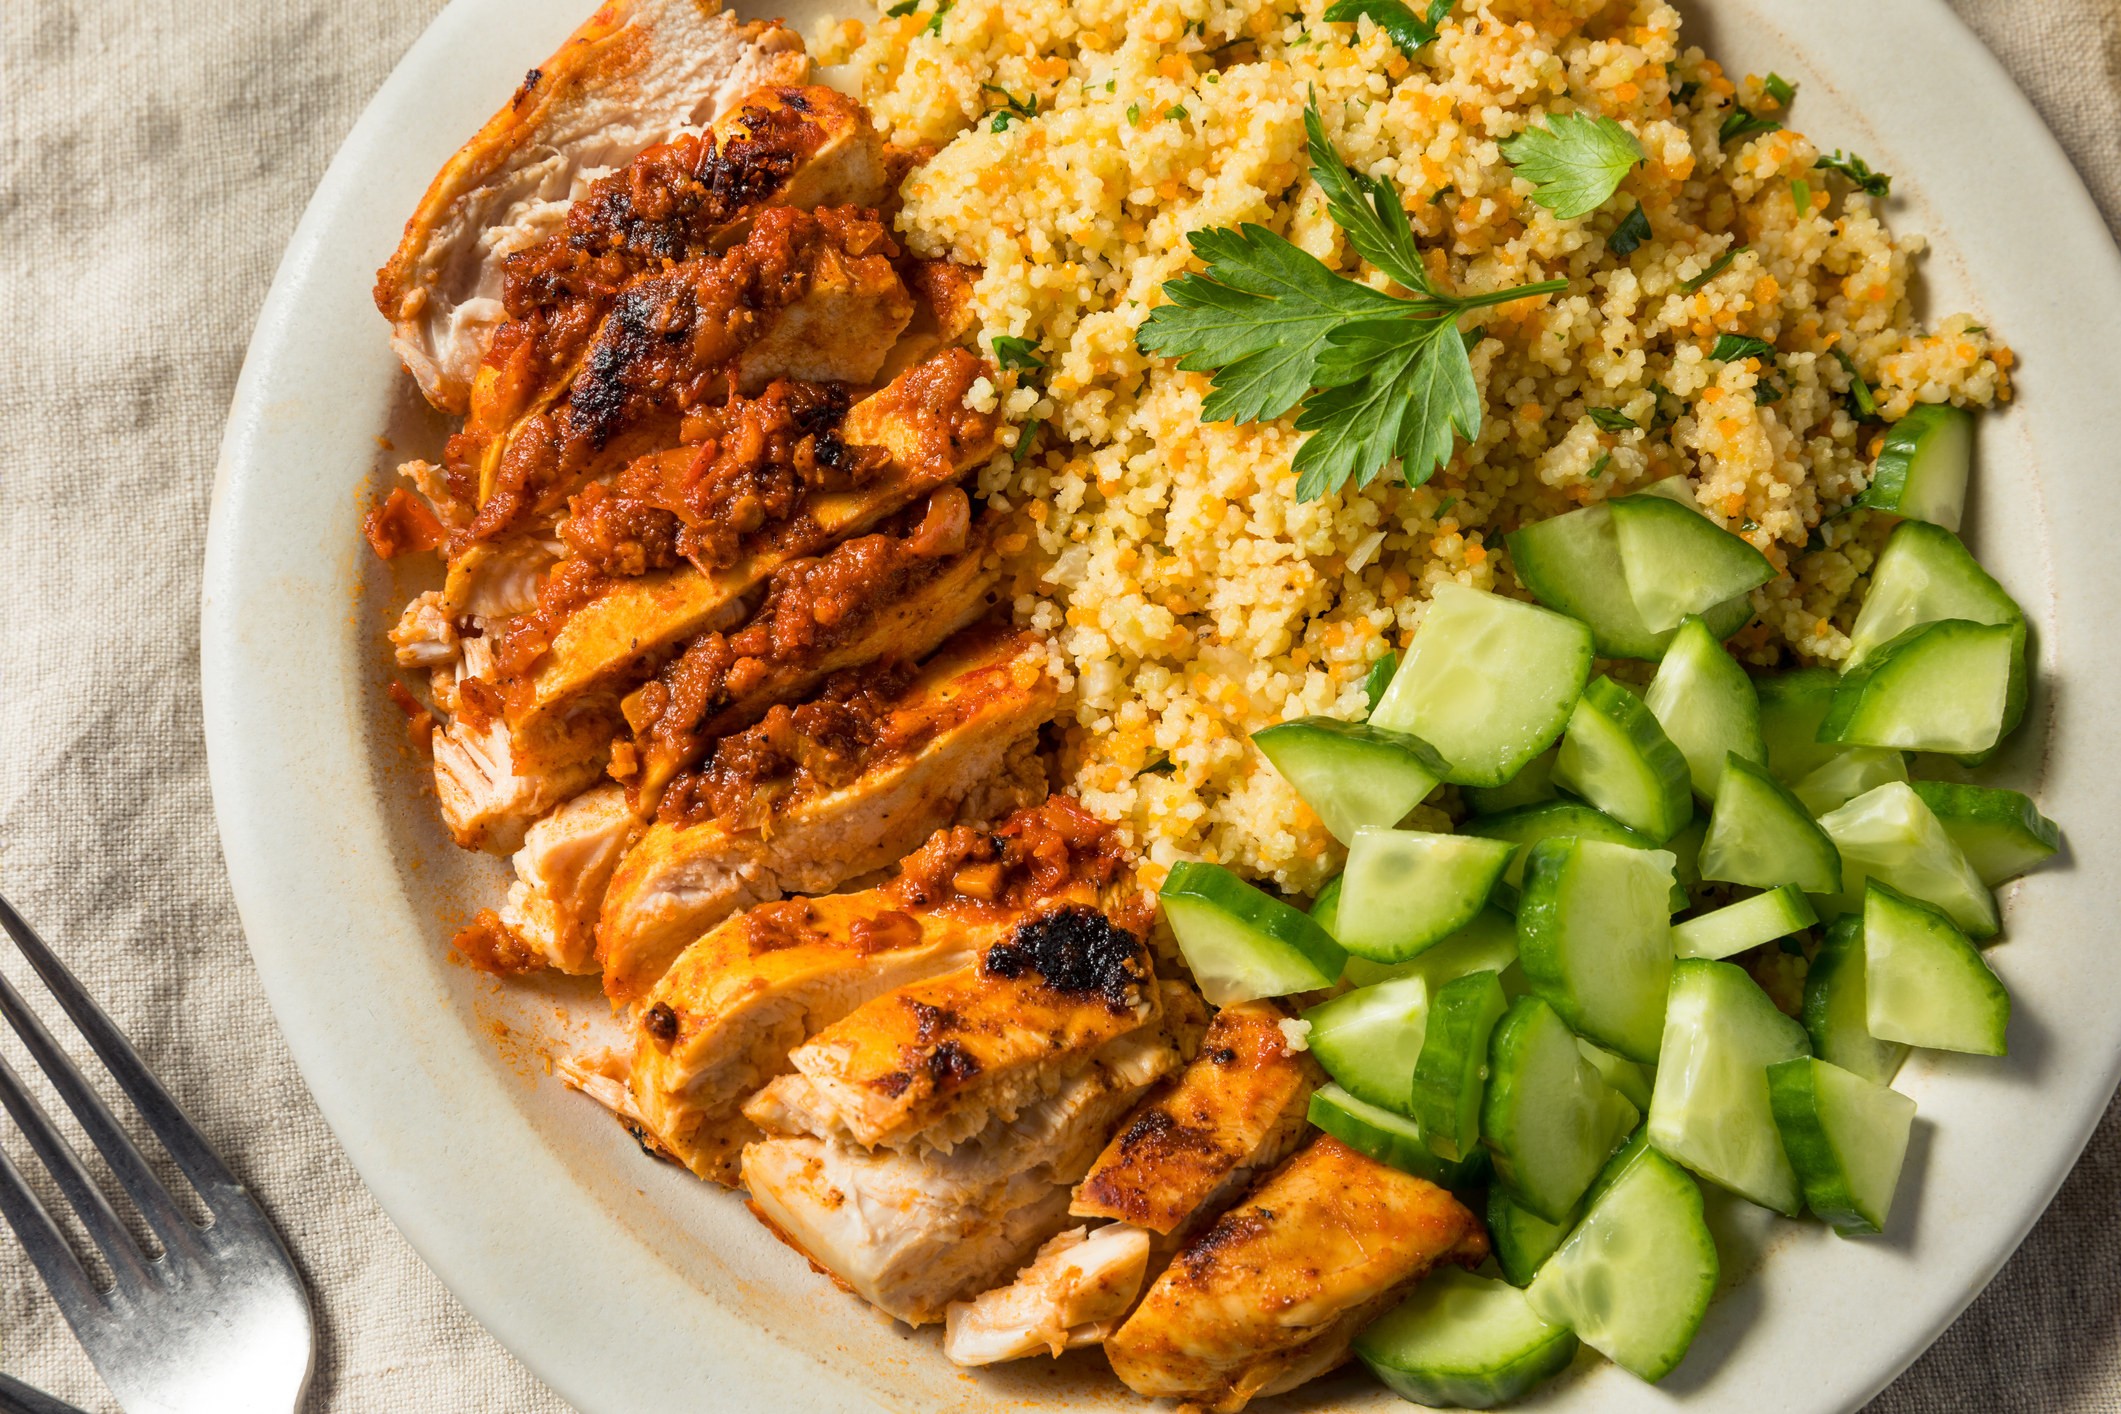 Harissa chicken with couscous and cucumber